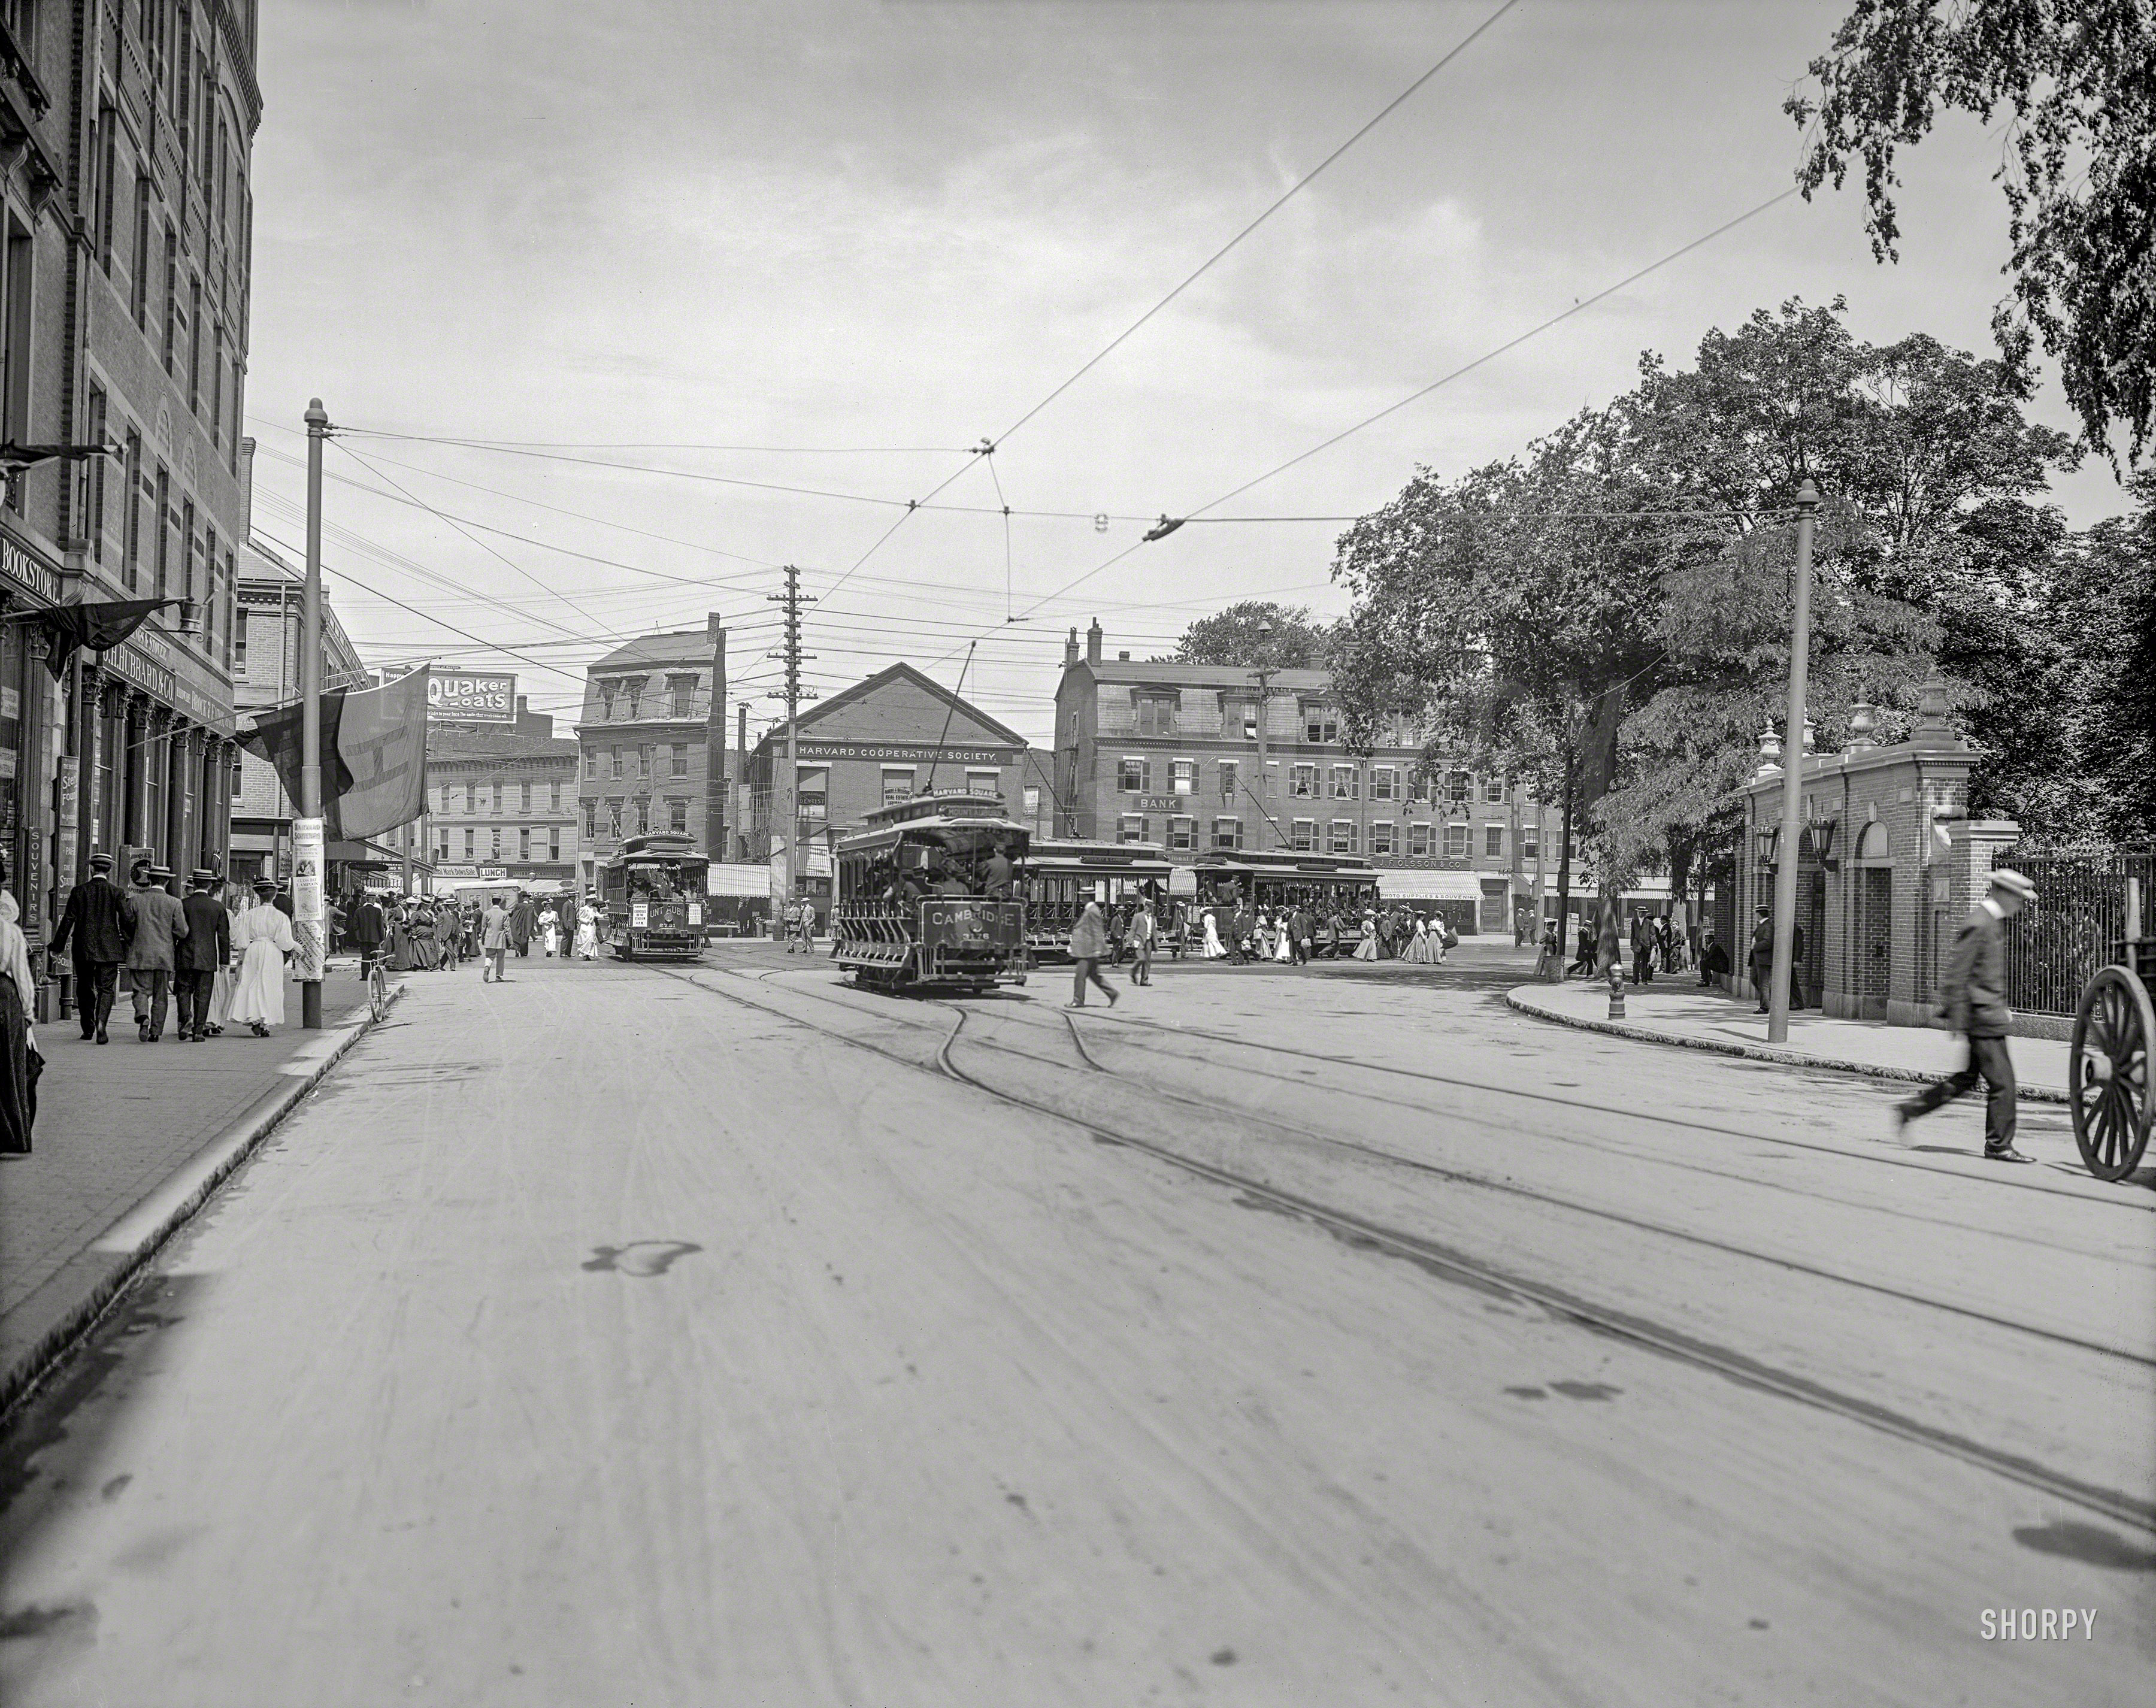 1906. "Harvard Square -- Cambridge, Massachusetts." Note the signs advertising "Class Day." 8x10 glass negative, Detroit Publishing Co. View full size.